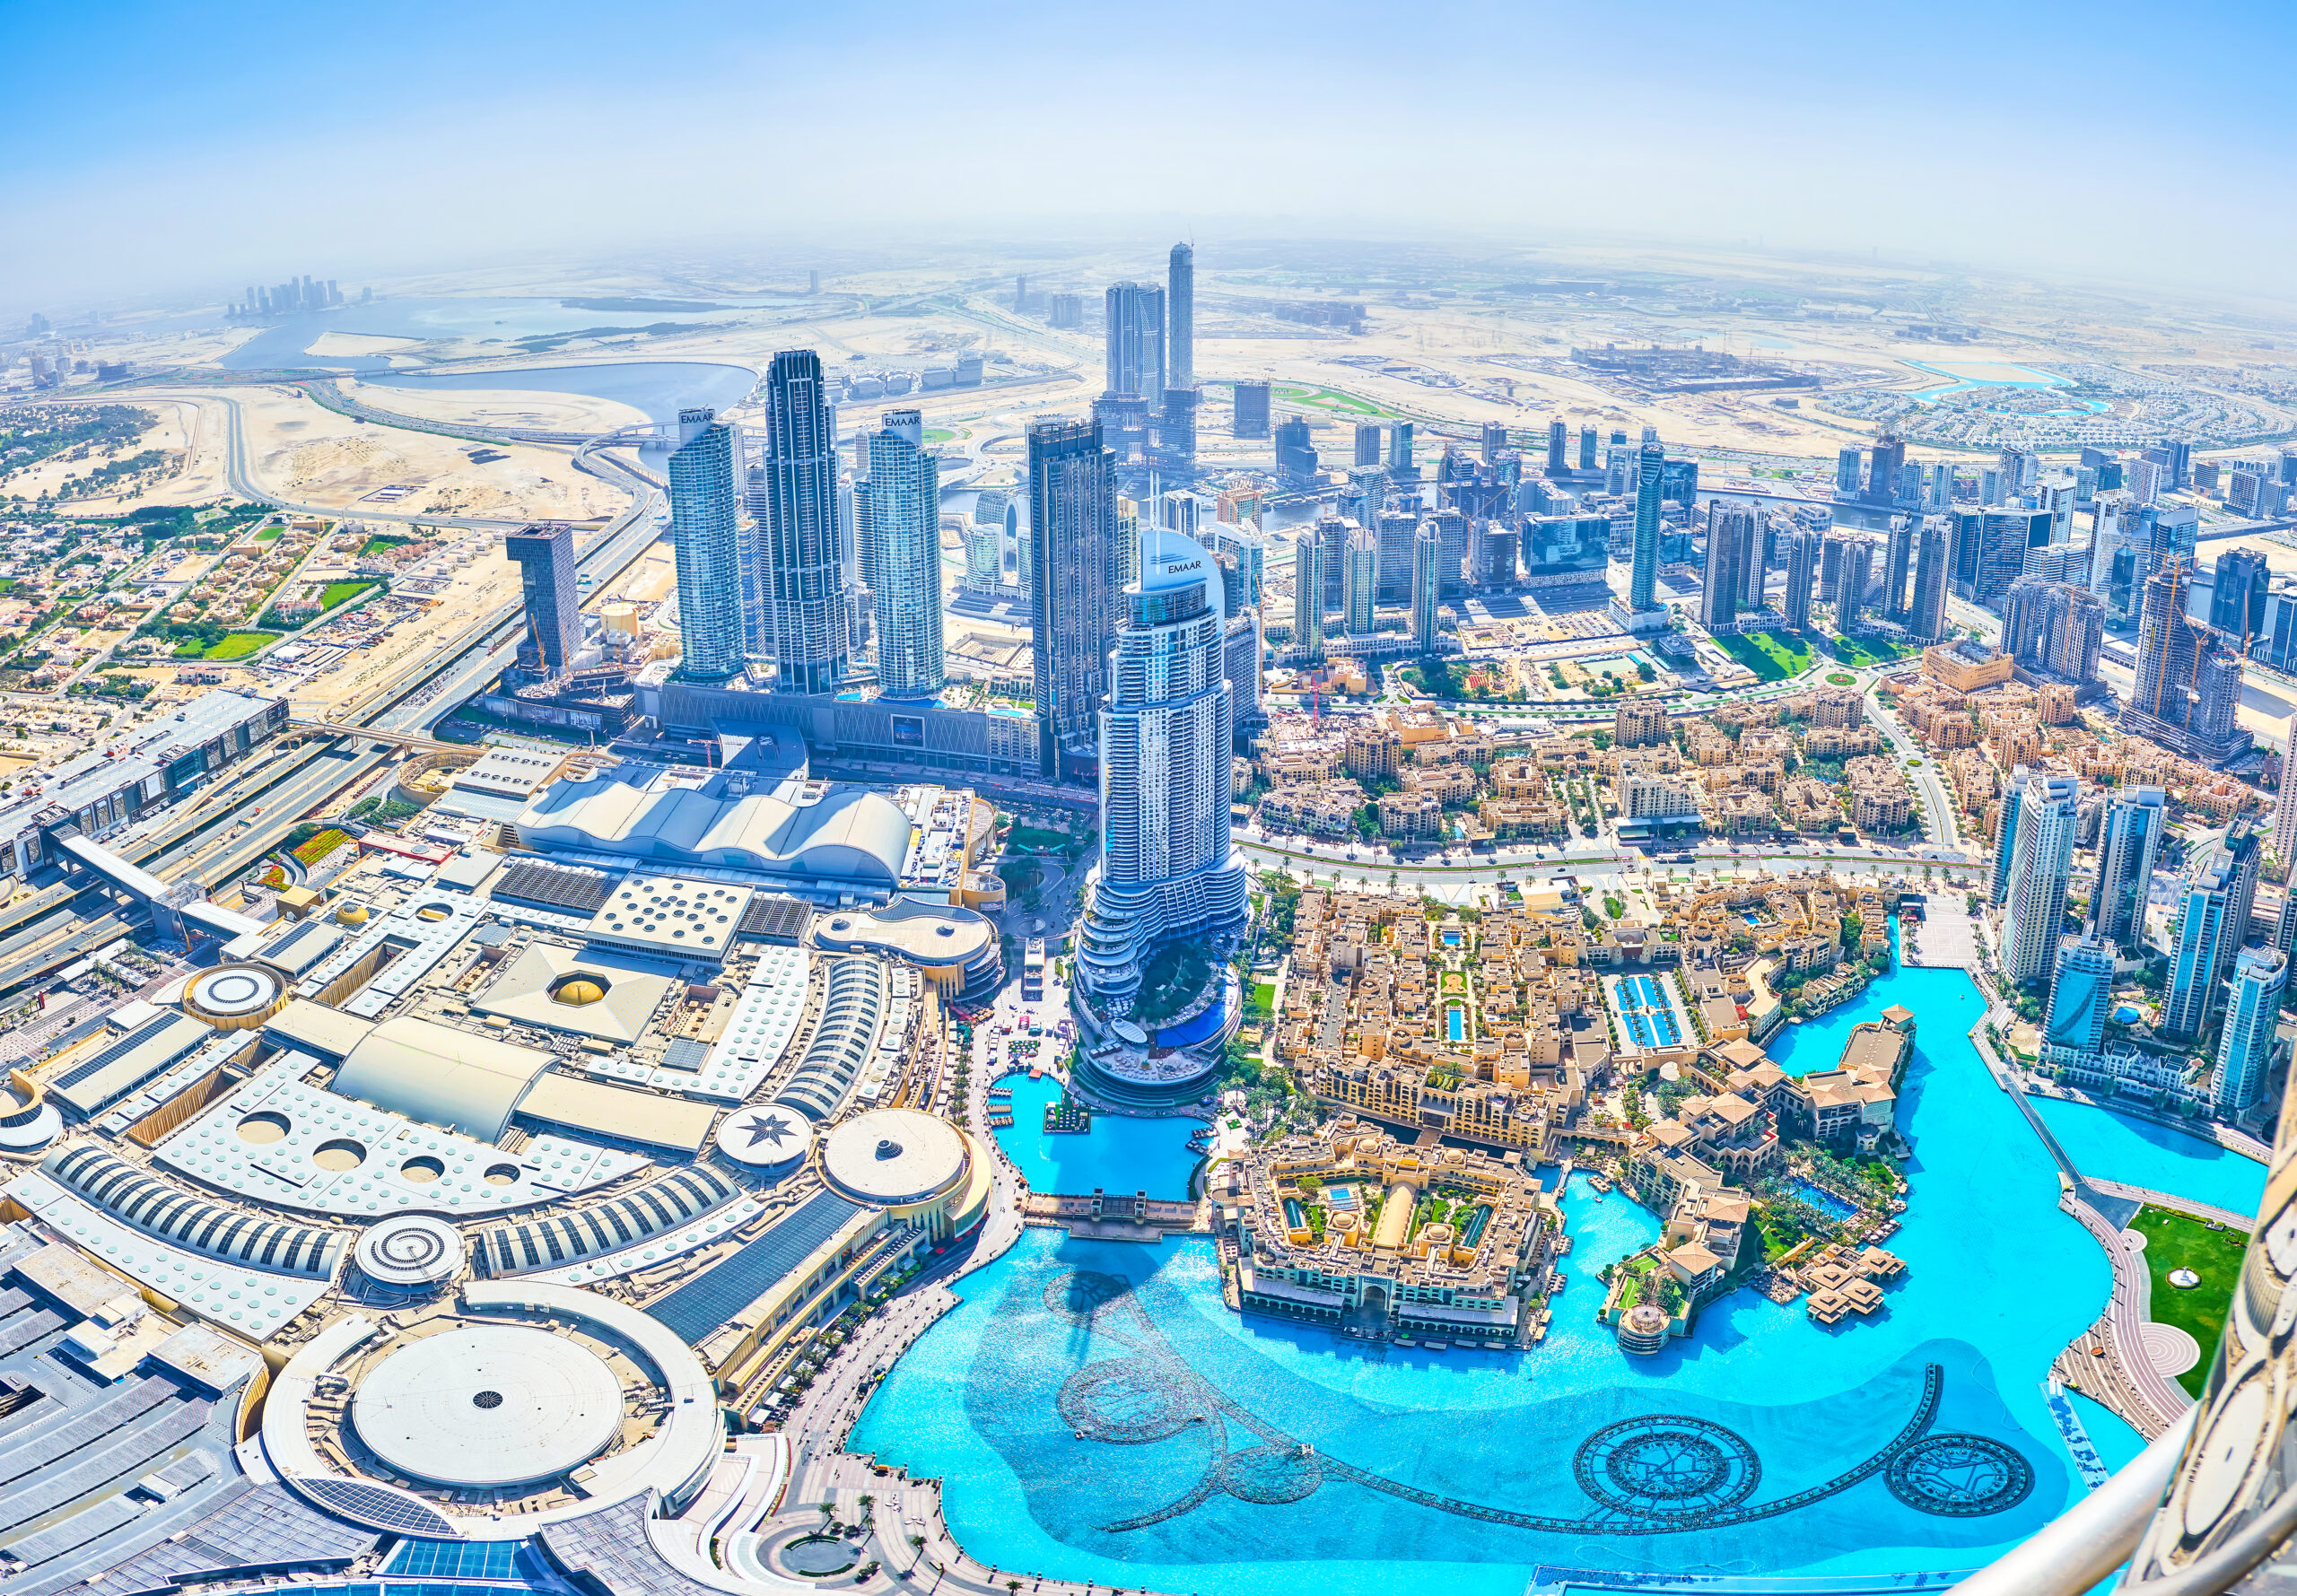 Dubai's luxurious rooftop pools, showcasing stunning infinity pools with breathtaking cityscape views